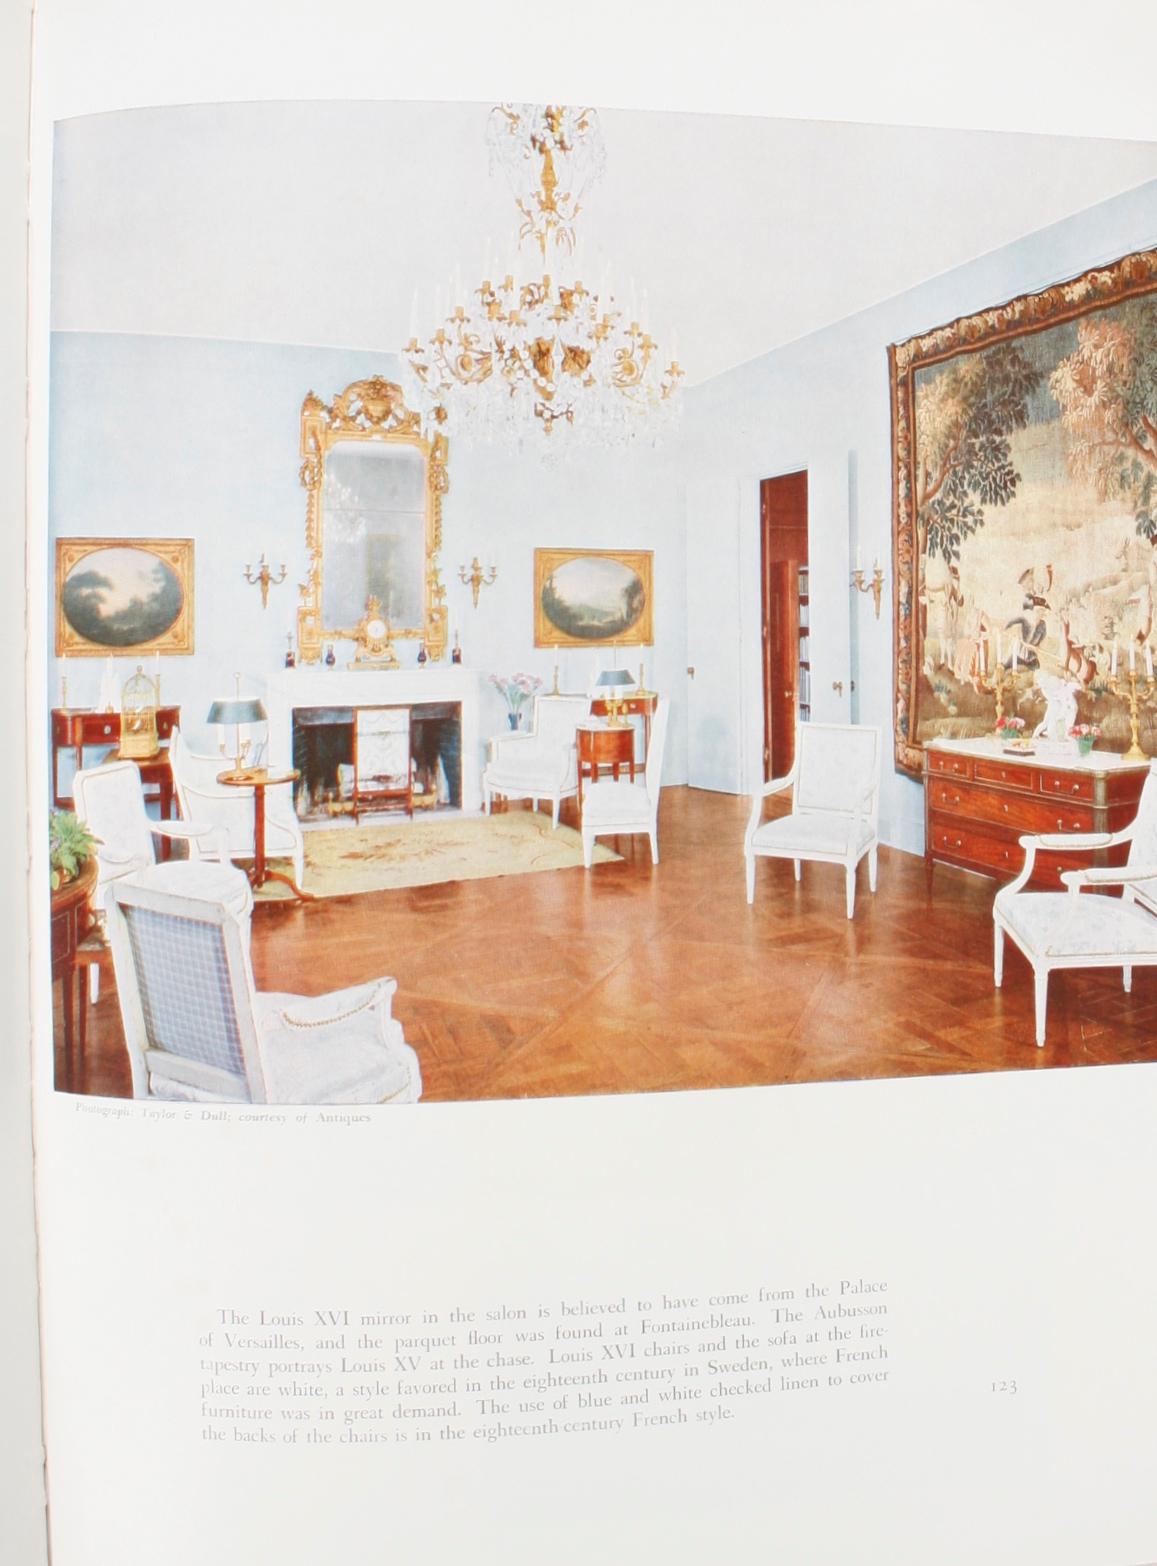 100 Most Beautiful Rooms in America by Helen Comstock. New York: Crown Publishers, Inc., 1961. Revised edition hardcover with dust jacket. 210 pp. A selection of 100 rooms chosen as the best in authentic traditional American home decoration. The